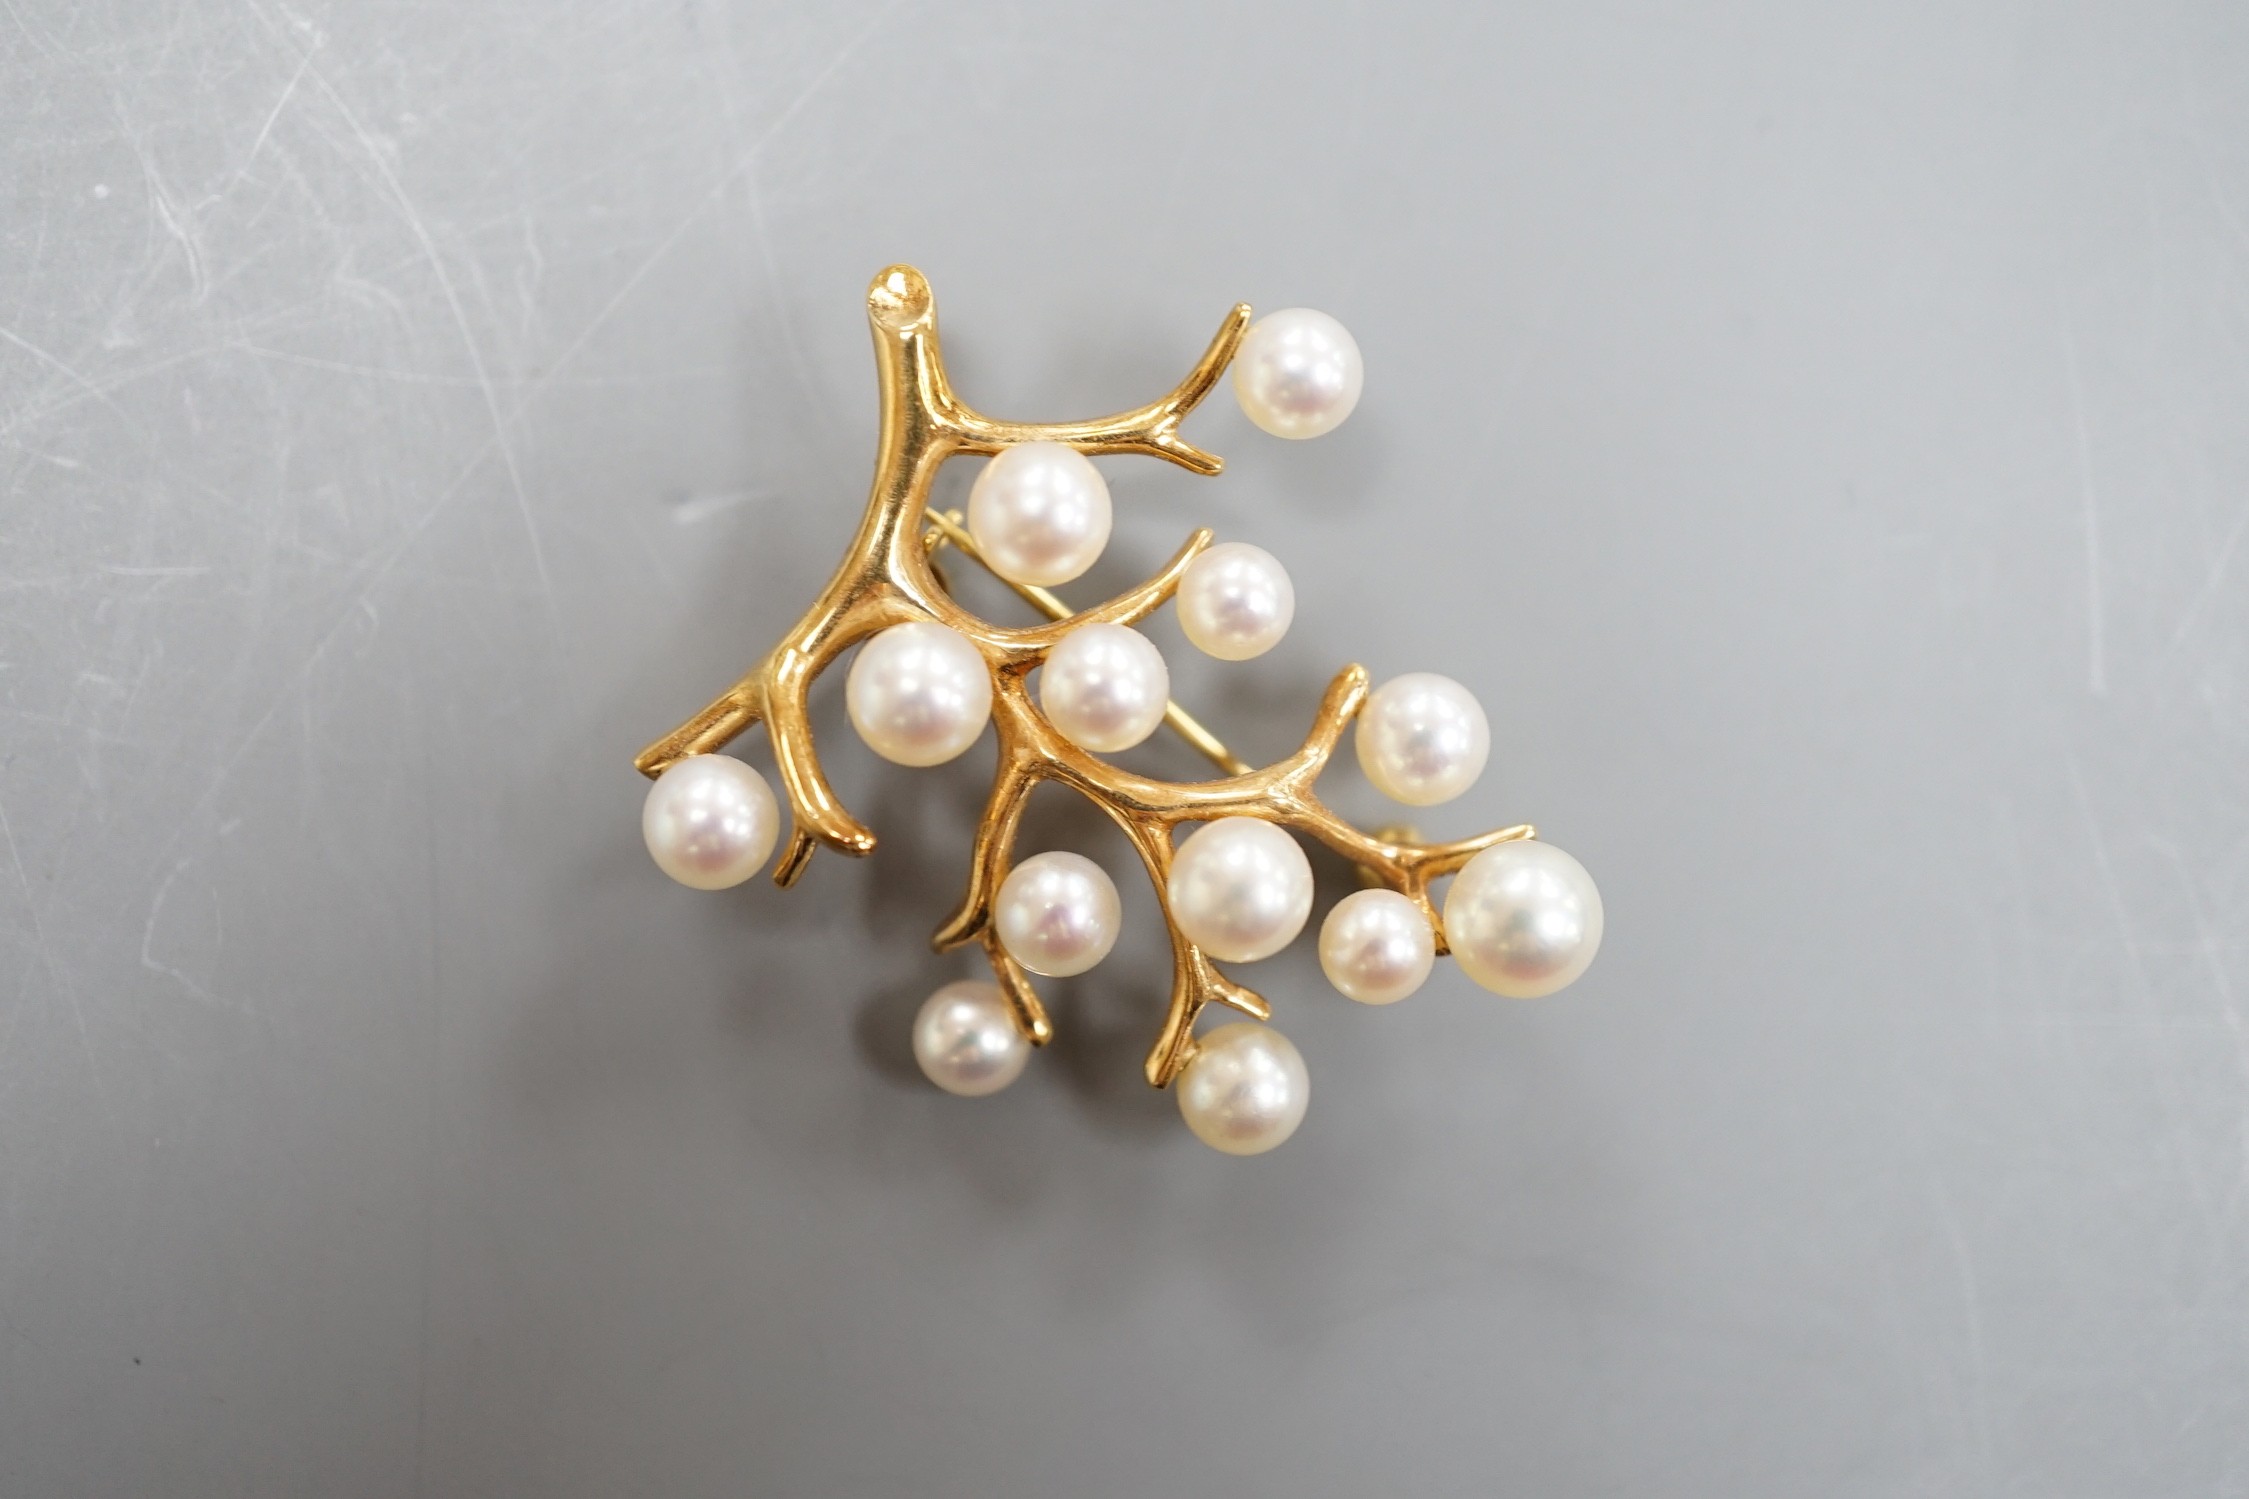 A Mikimoto 14k yellow metal and cultured pearl set cluster spray brooch, 34mm, gross weight 5.9 grams.